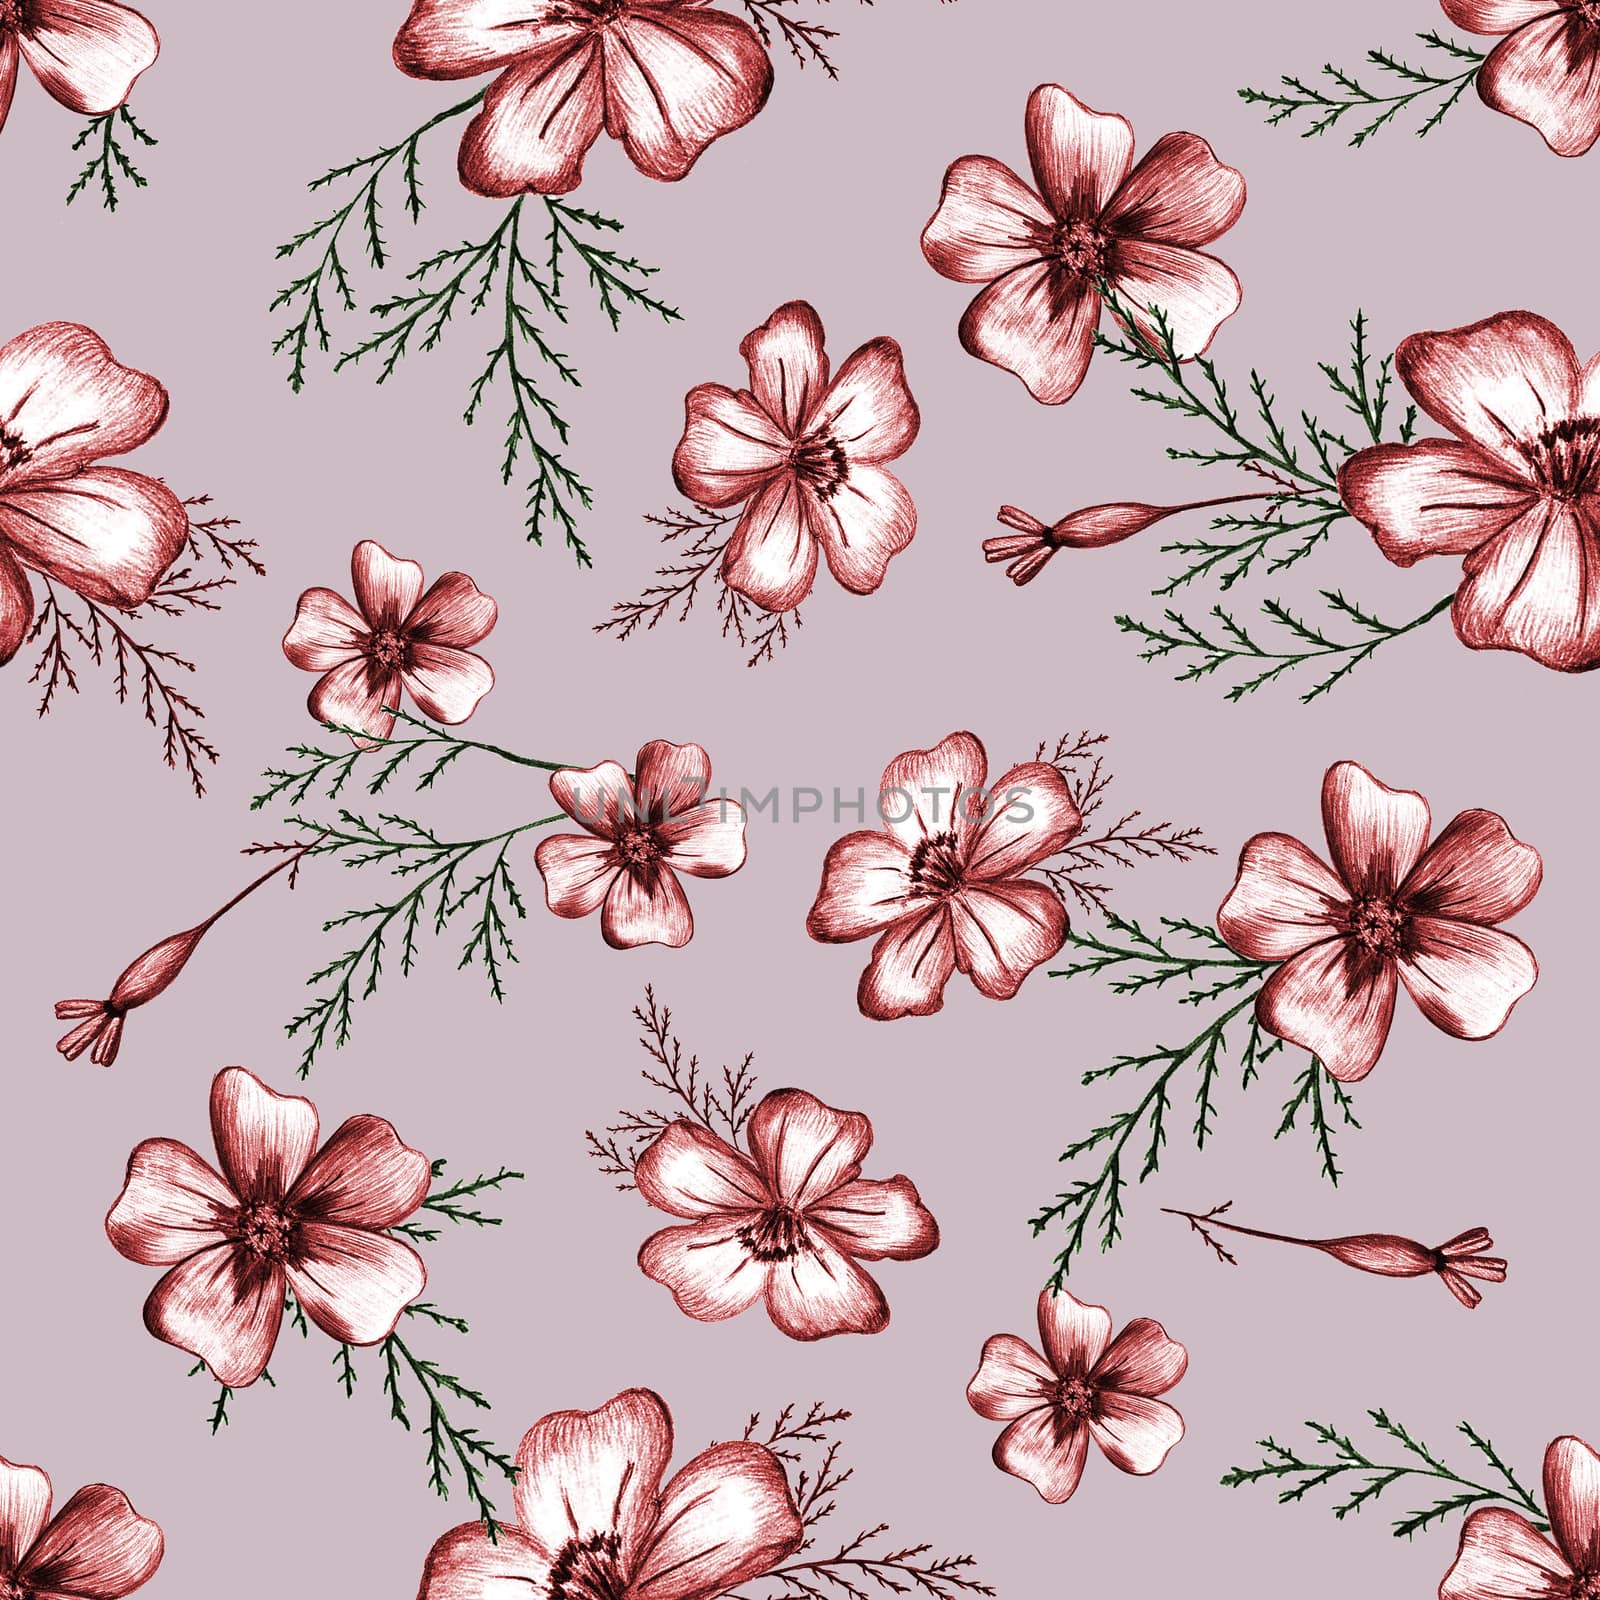 Seamless Pattern with Hand-Drawn Flower. Background with Thin-leaved Marigolds for Print, Design, Holiday, Wedding and Birthday Card.